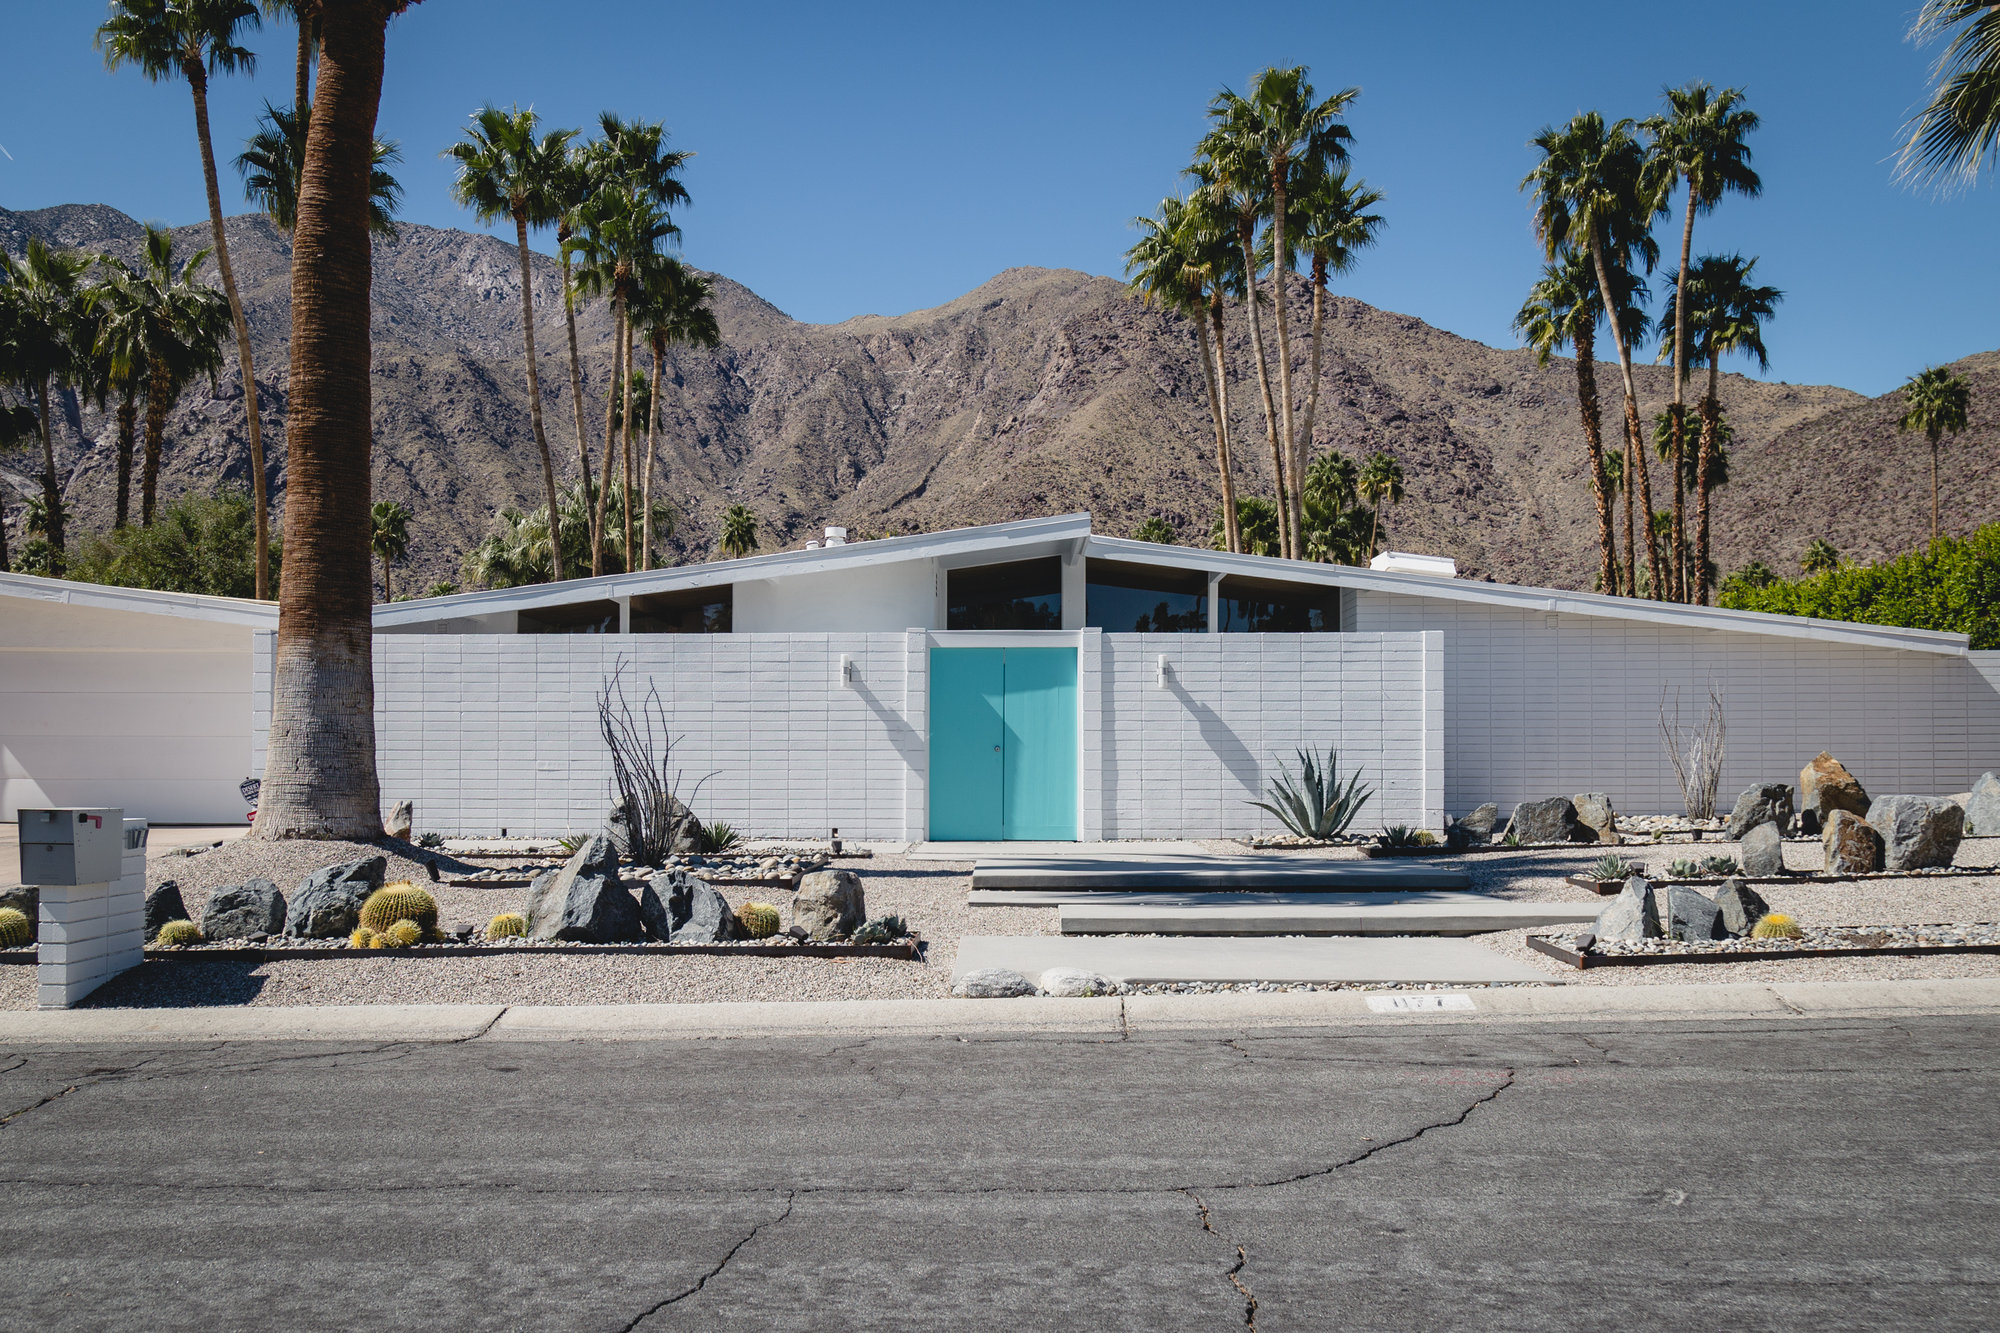 The Palm Springs Neighborhoods With The Most Beautiful Mid-Century ...